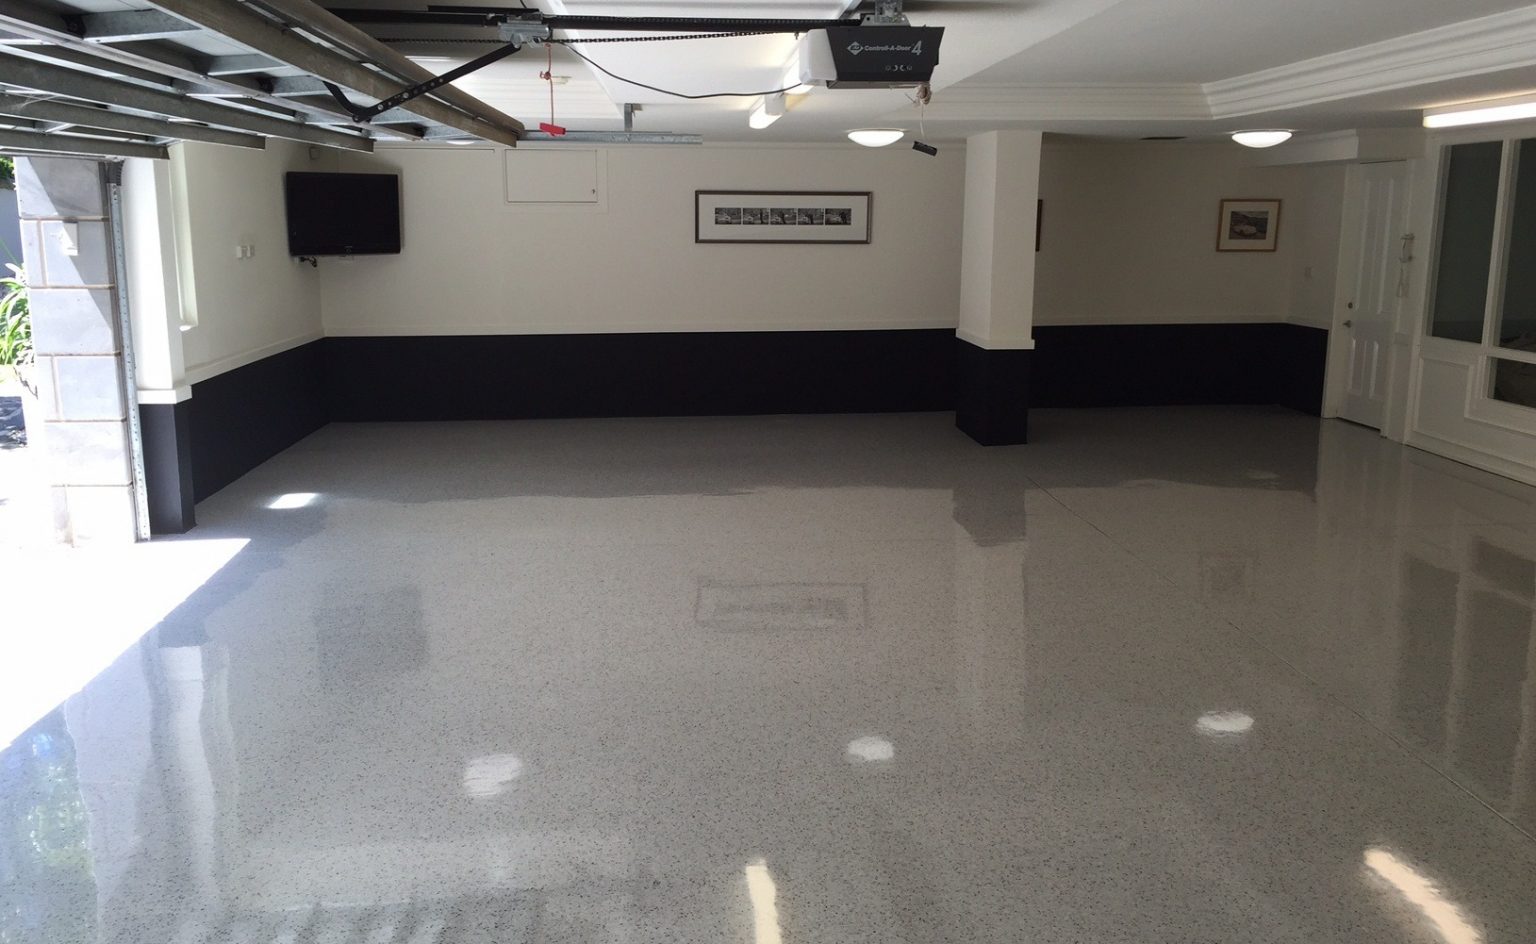 Understanding The Advantages and Disadvantages Of Epoxy Flooring